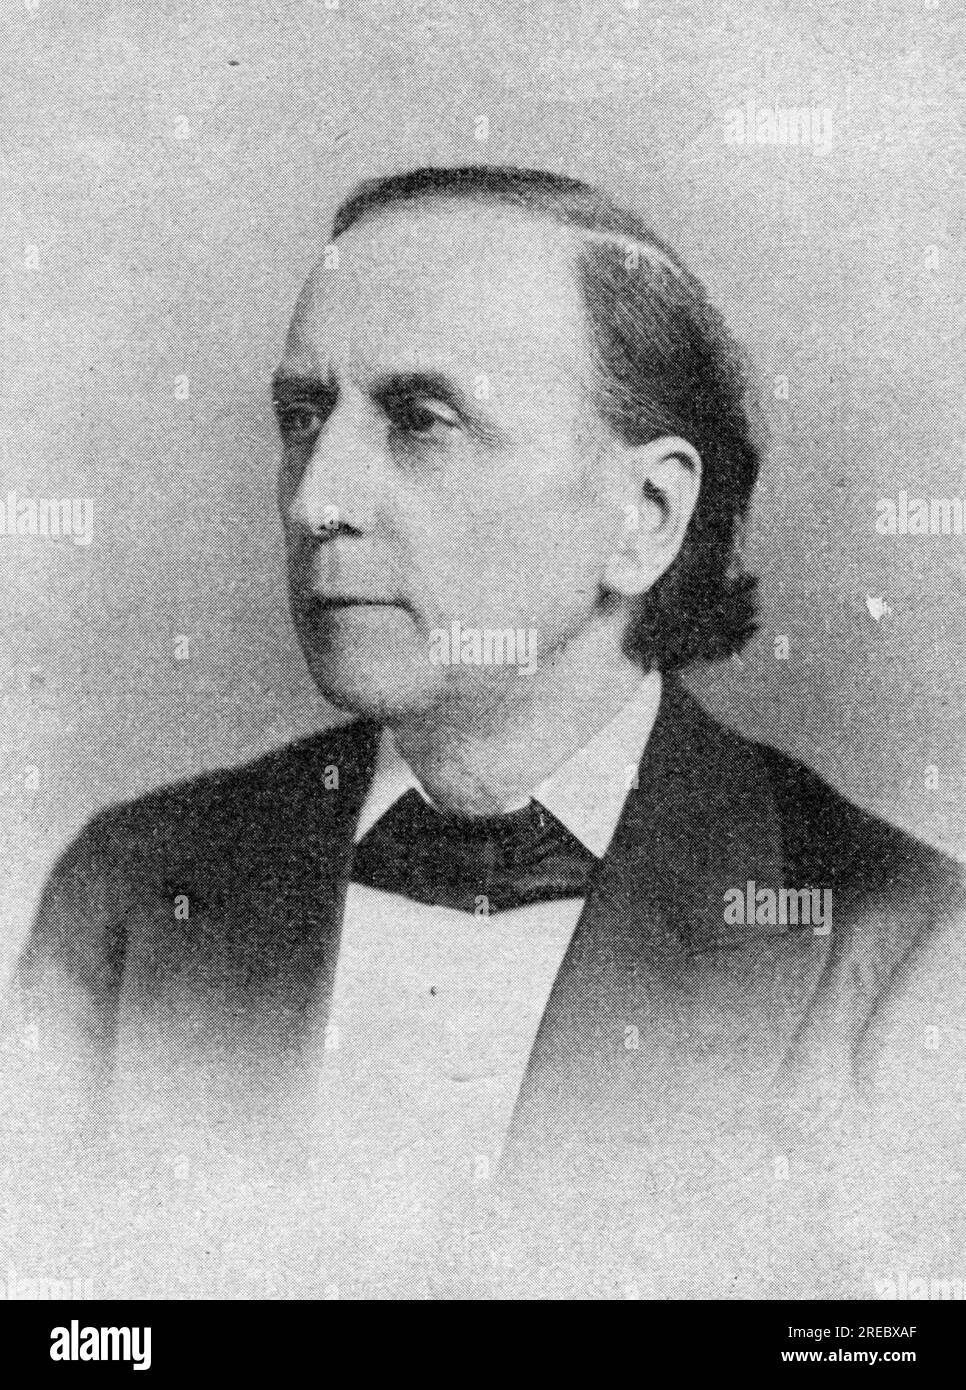 Vahlen, Johannes, 27.9.1830 - 30.11.1911, German classical philologist, print based on photograph, ADDITIONAL-RIGHTS-CLEARANCE-INFO-NOT-AVAILABLE Stock Photo